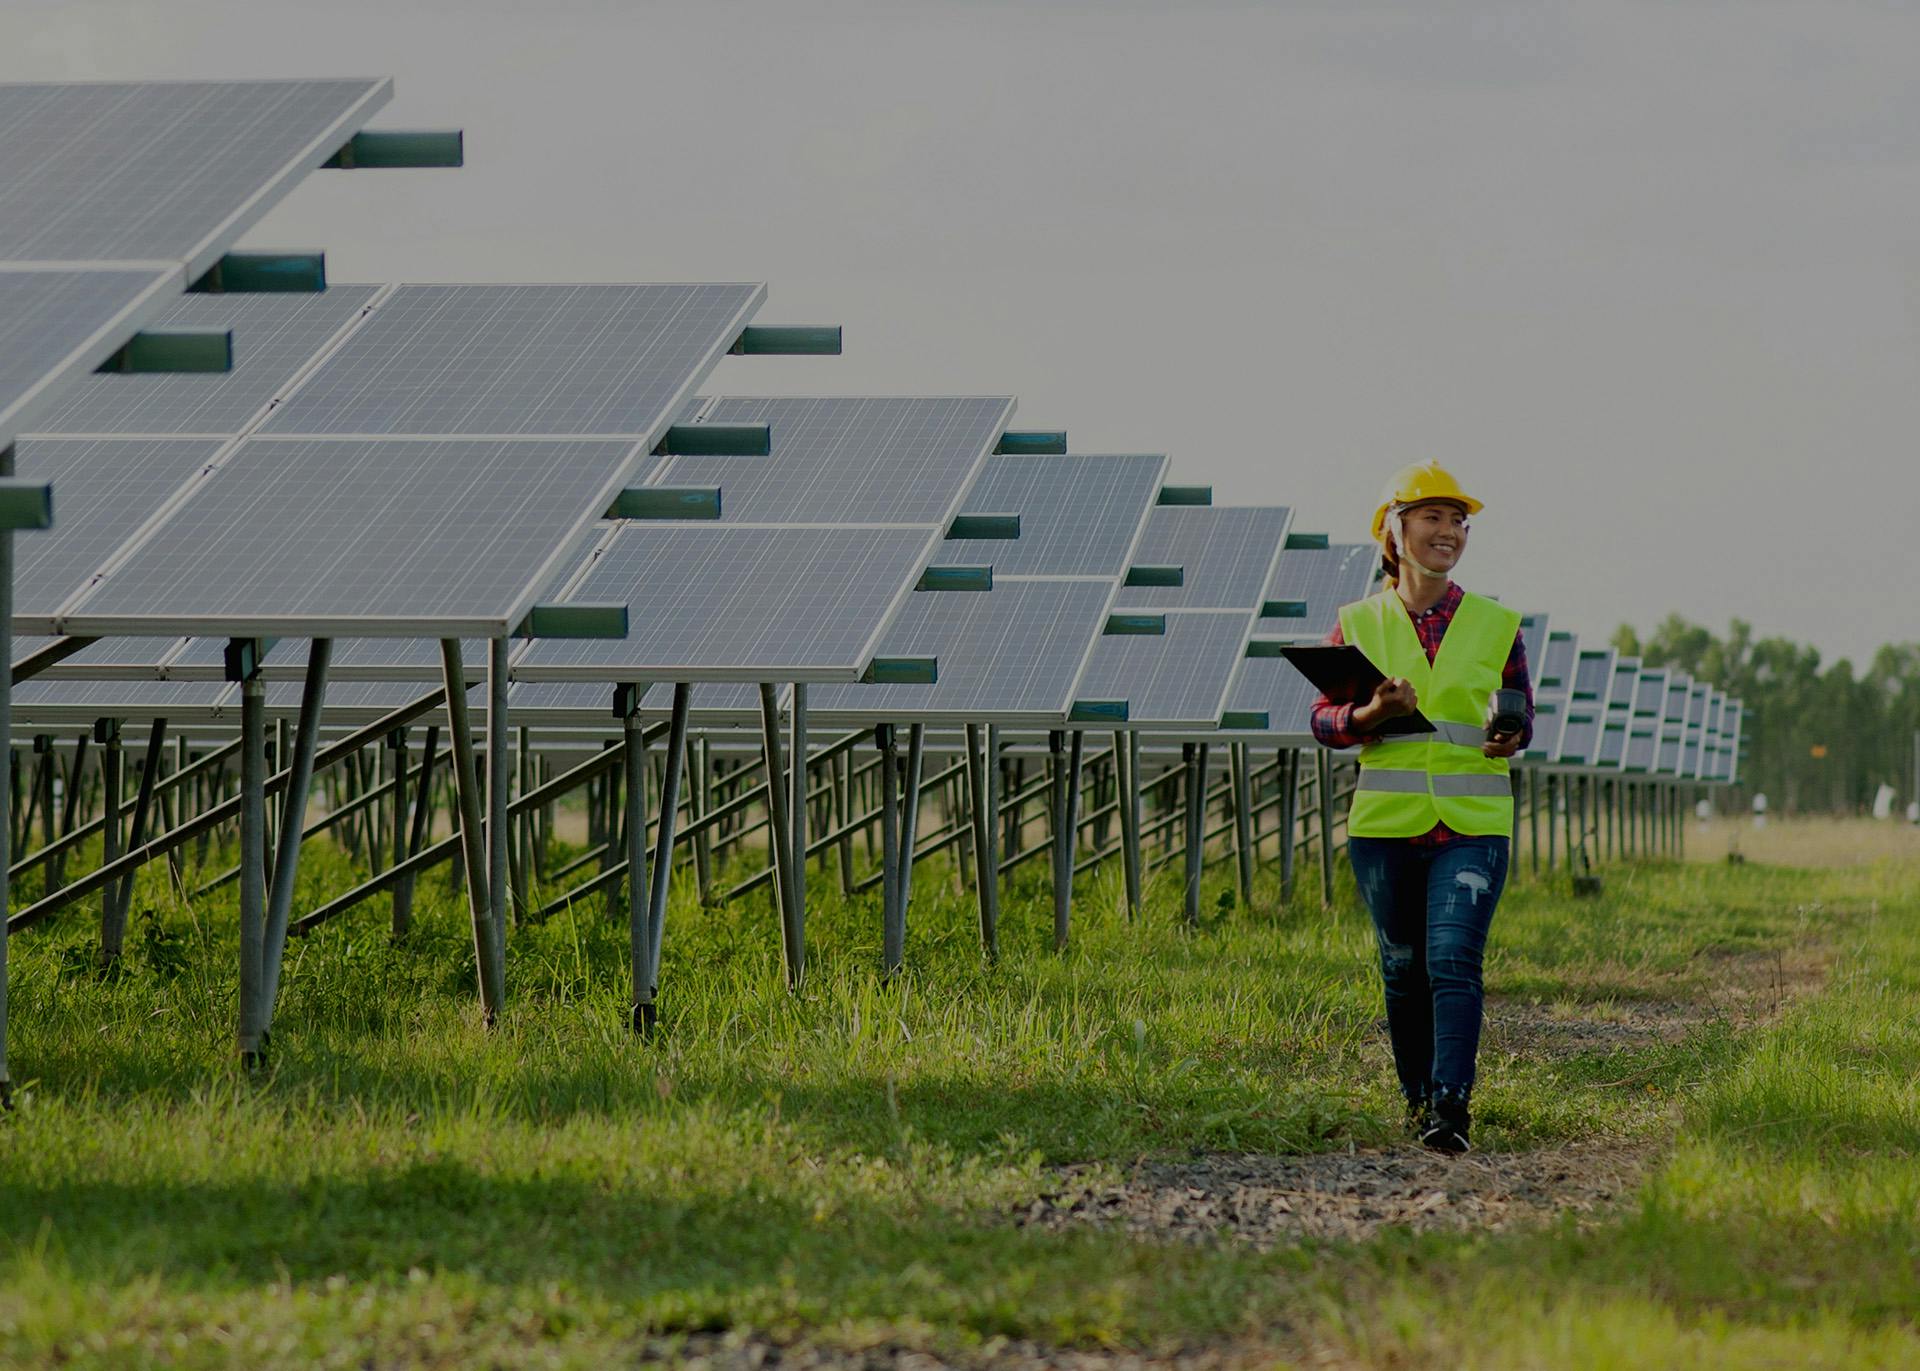 Engineer working in the Cleantech field